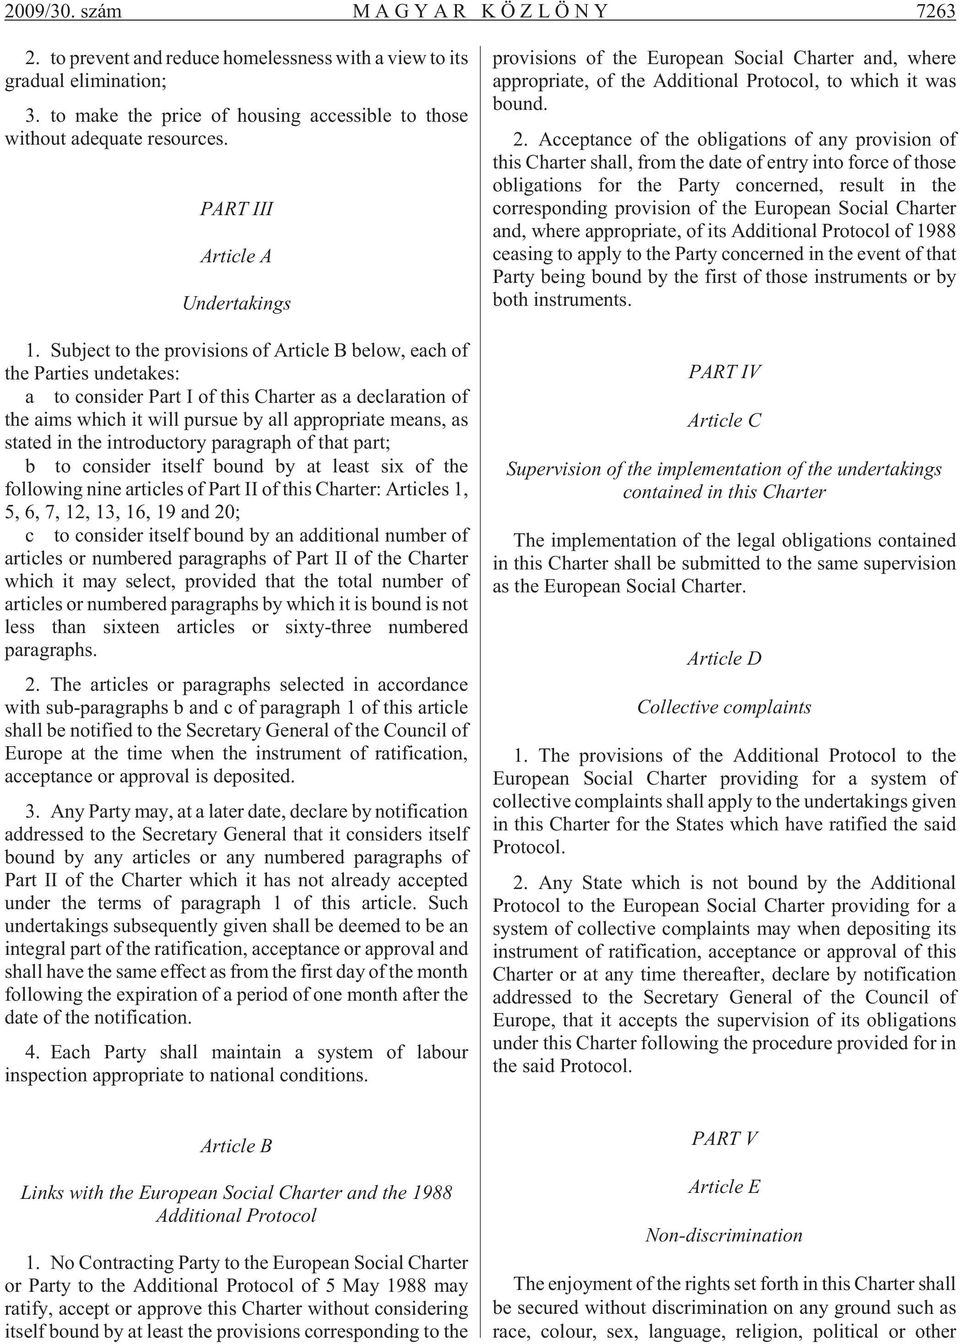 Subject to the provisions of Article B below, each of the Parties undetakes: a to consider Part I of this Charter as a declaration of the aims which it will pursue by all appropriate means, as stated